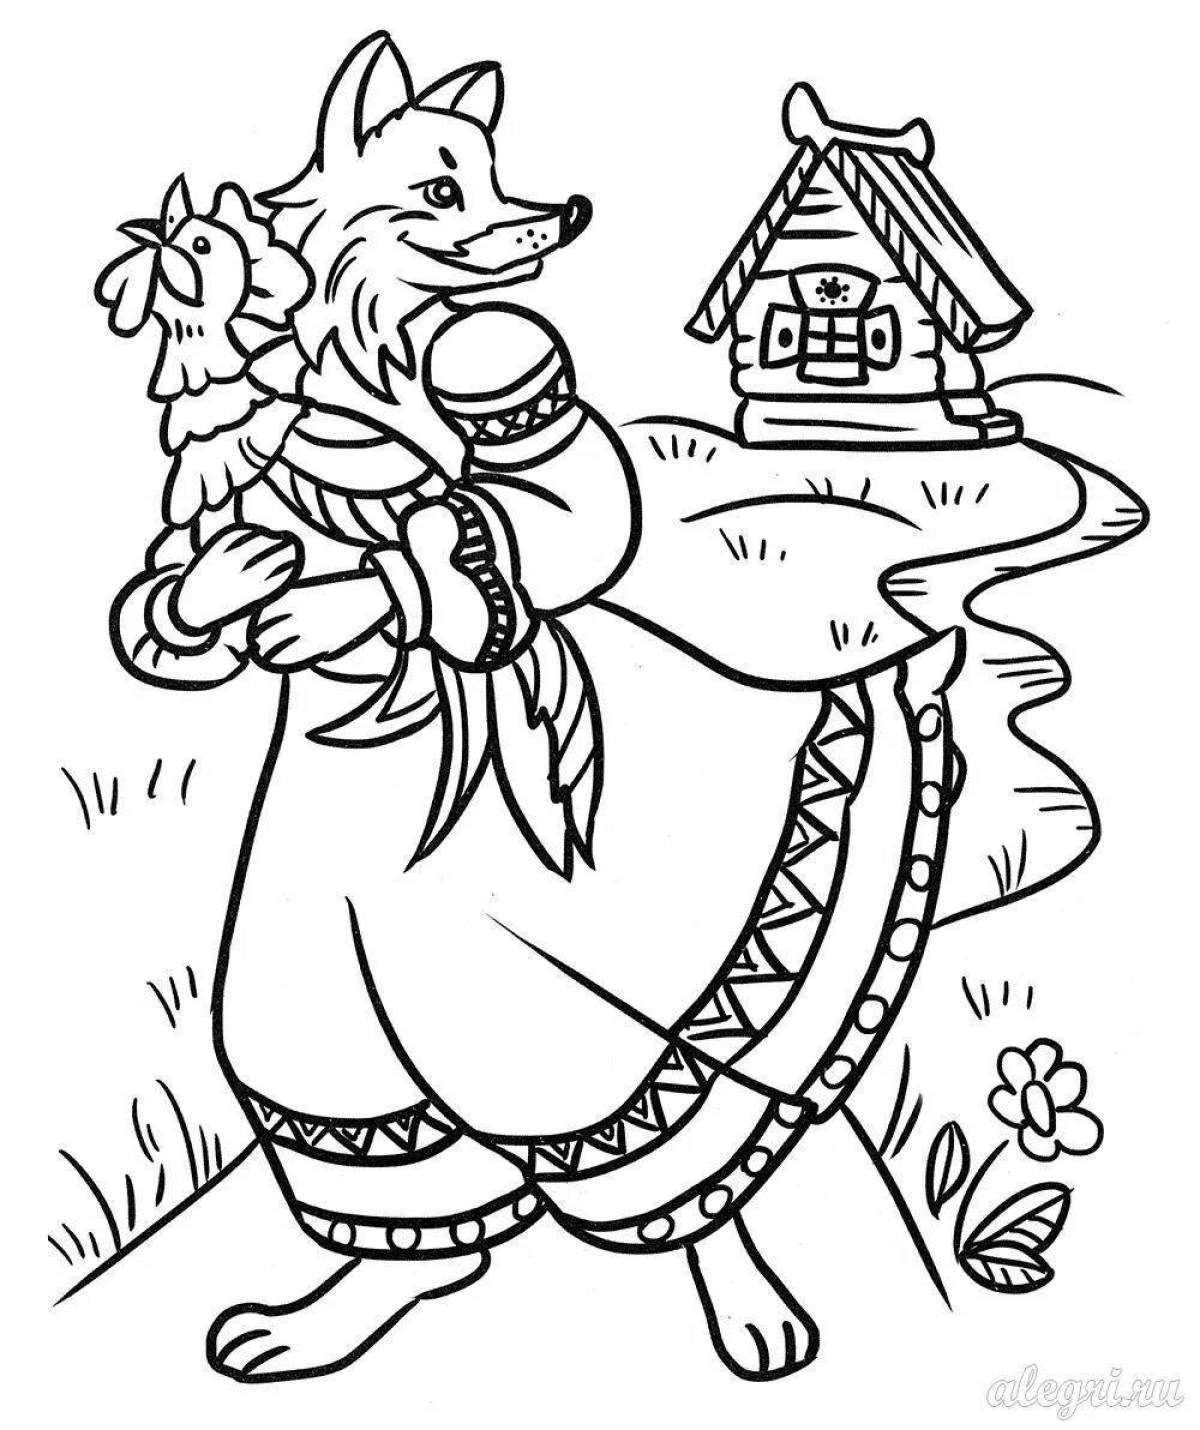 Exquisite fairy tale coloring book